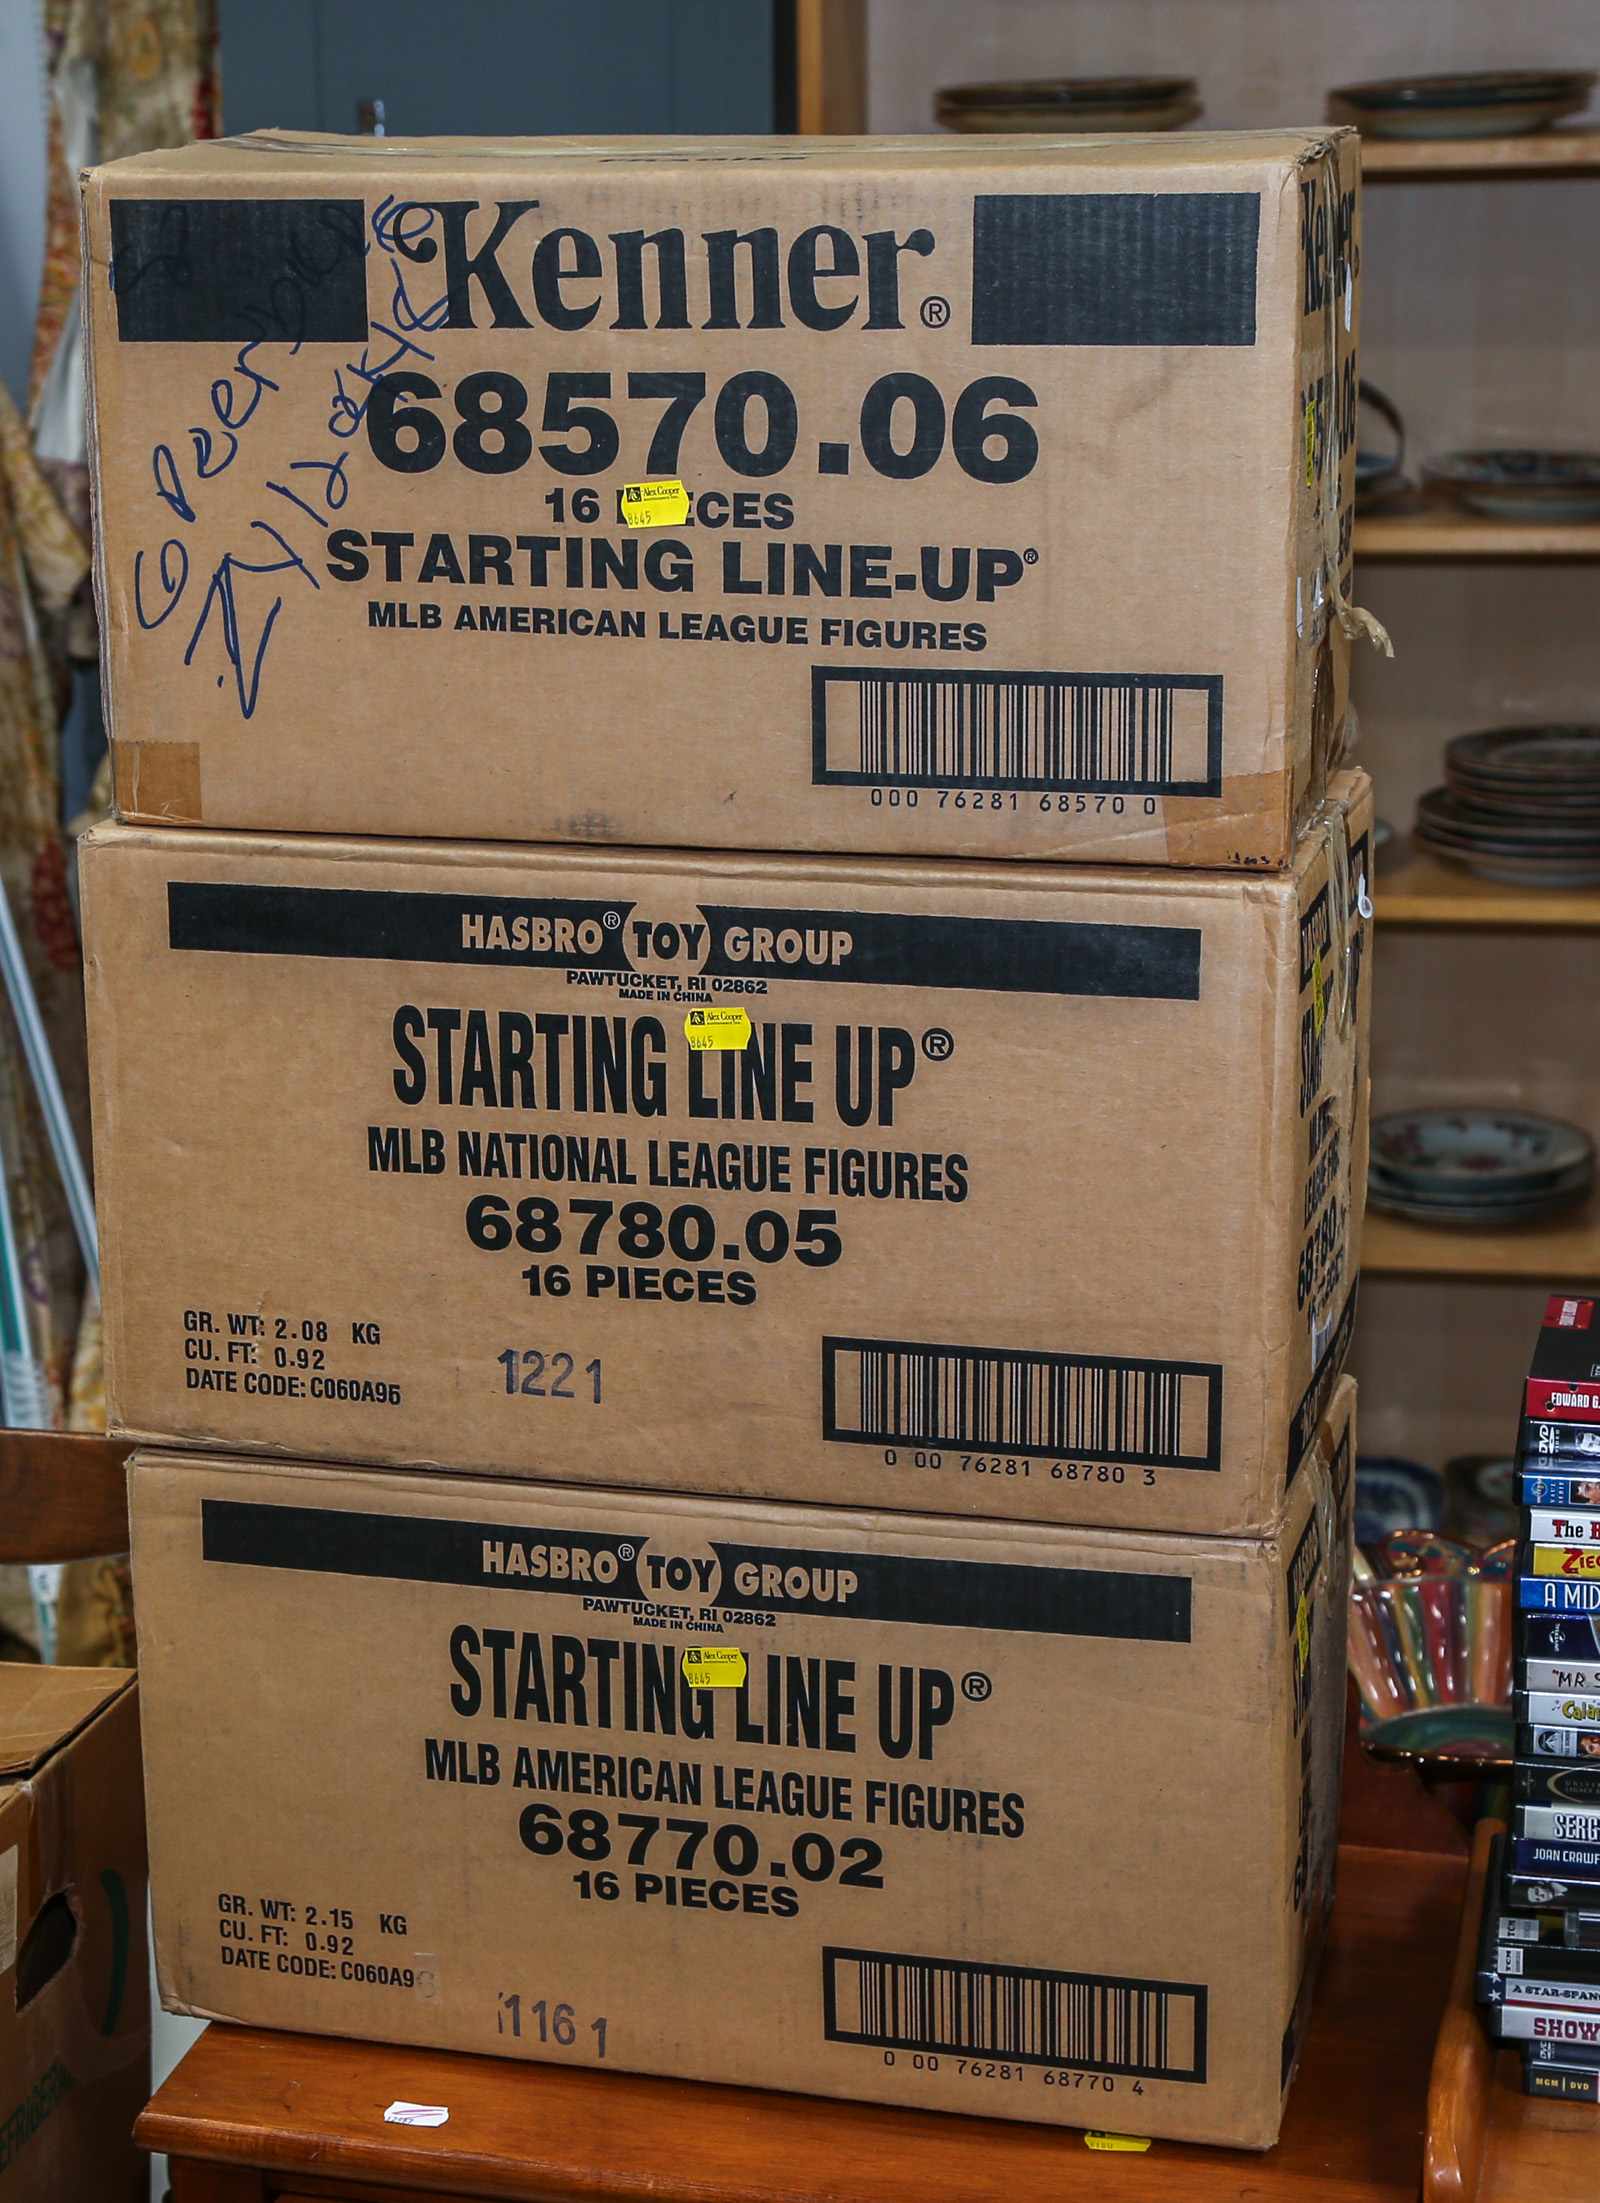 THREE BOXES OF STARTING LINE UP 3cb357